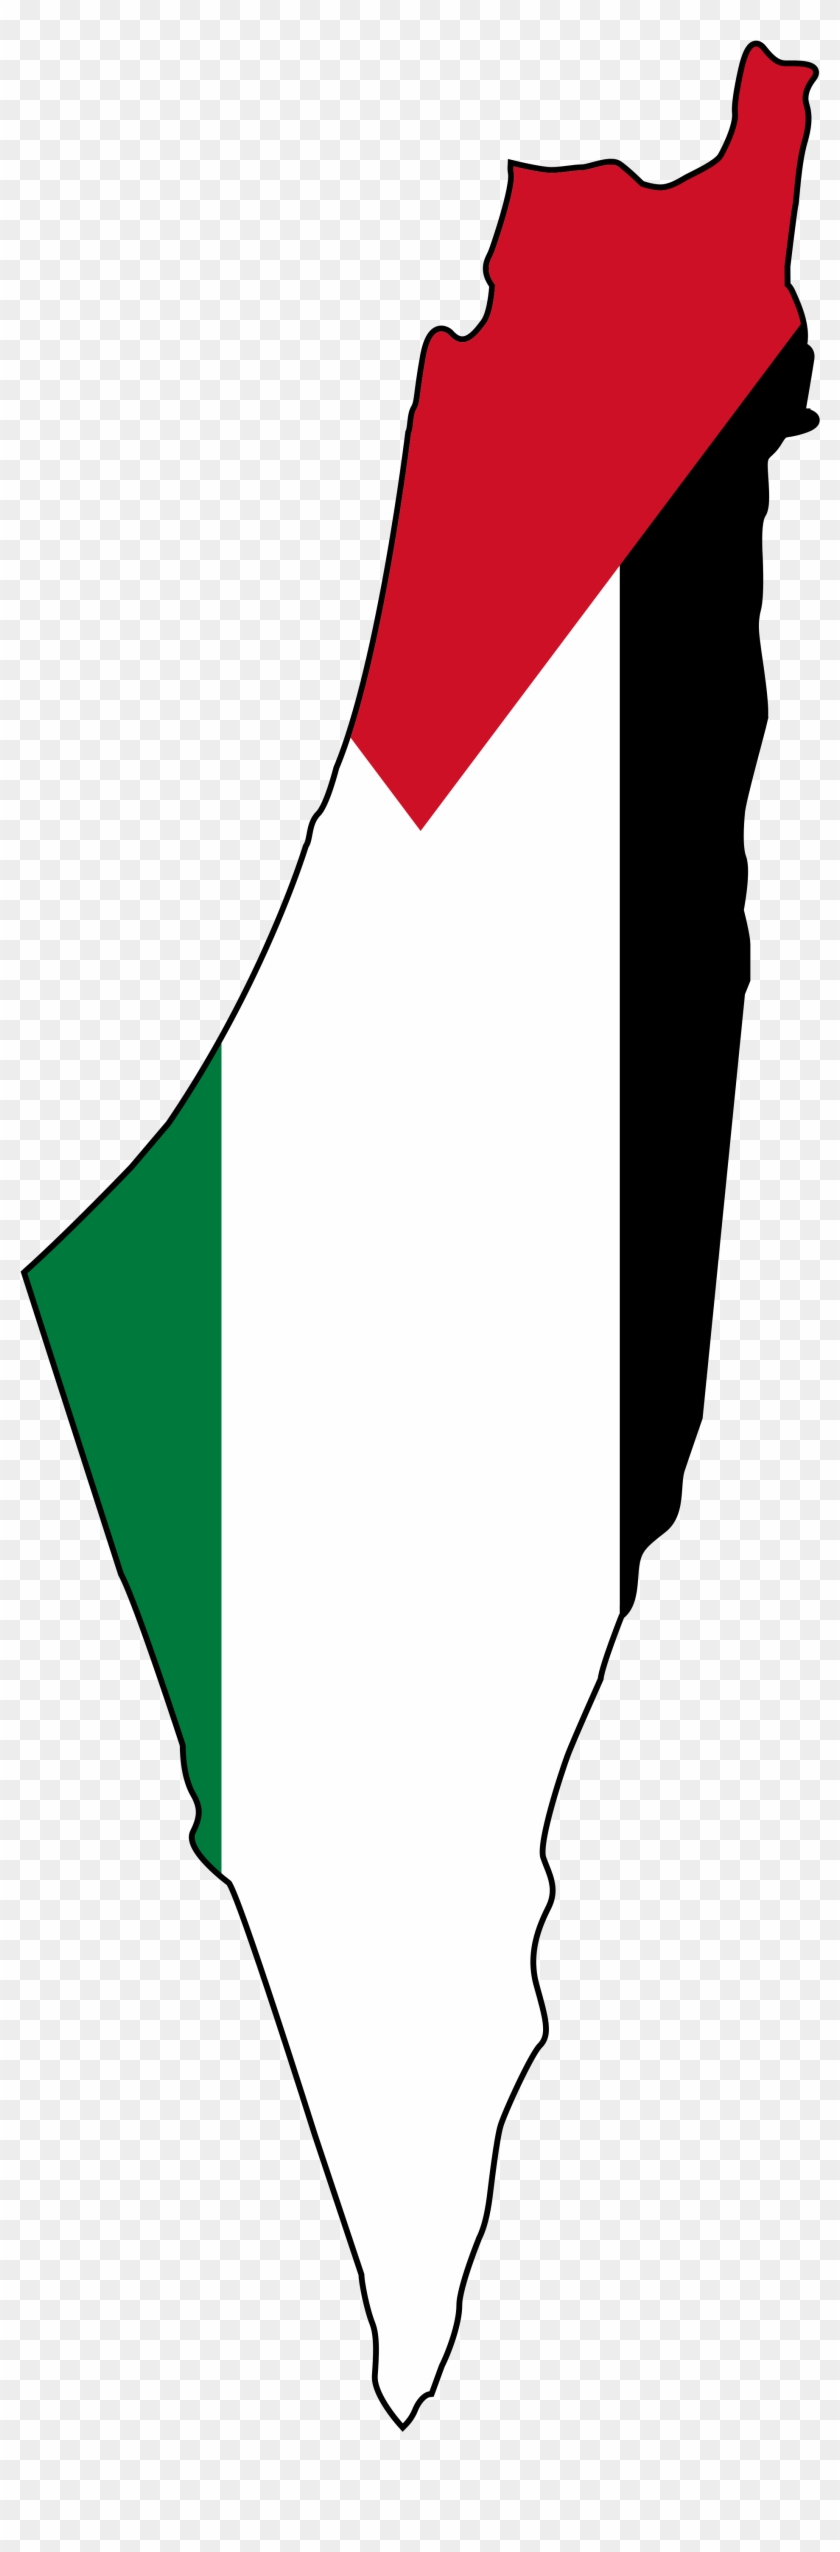 Israeli Flag Cliparts 17, Buy Clip Art - Palestine Map With Flag #330045